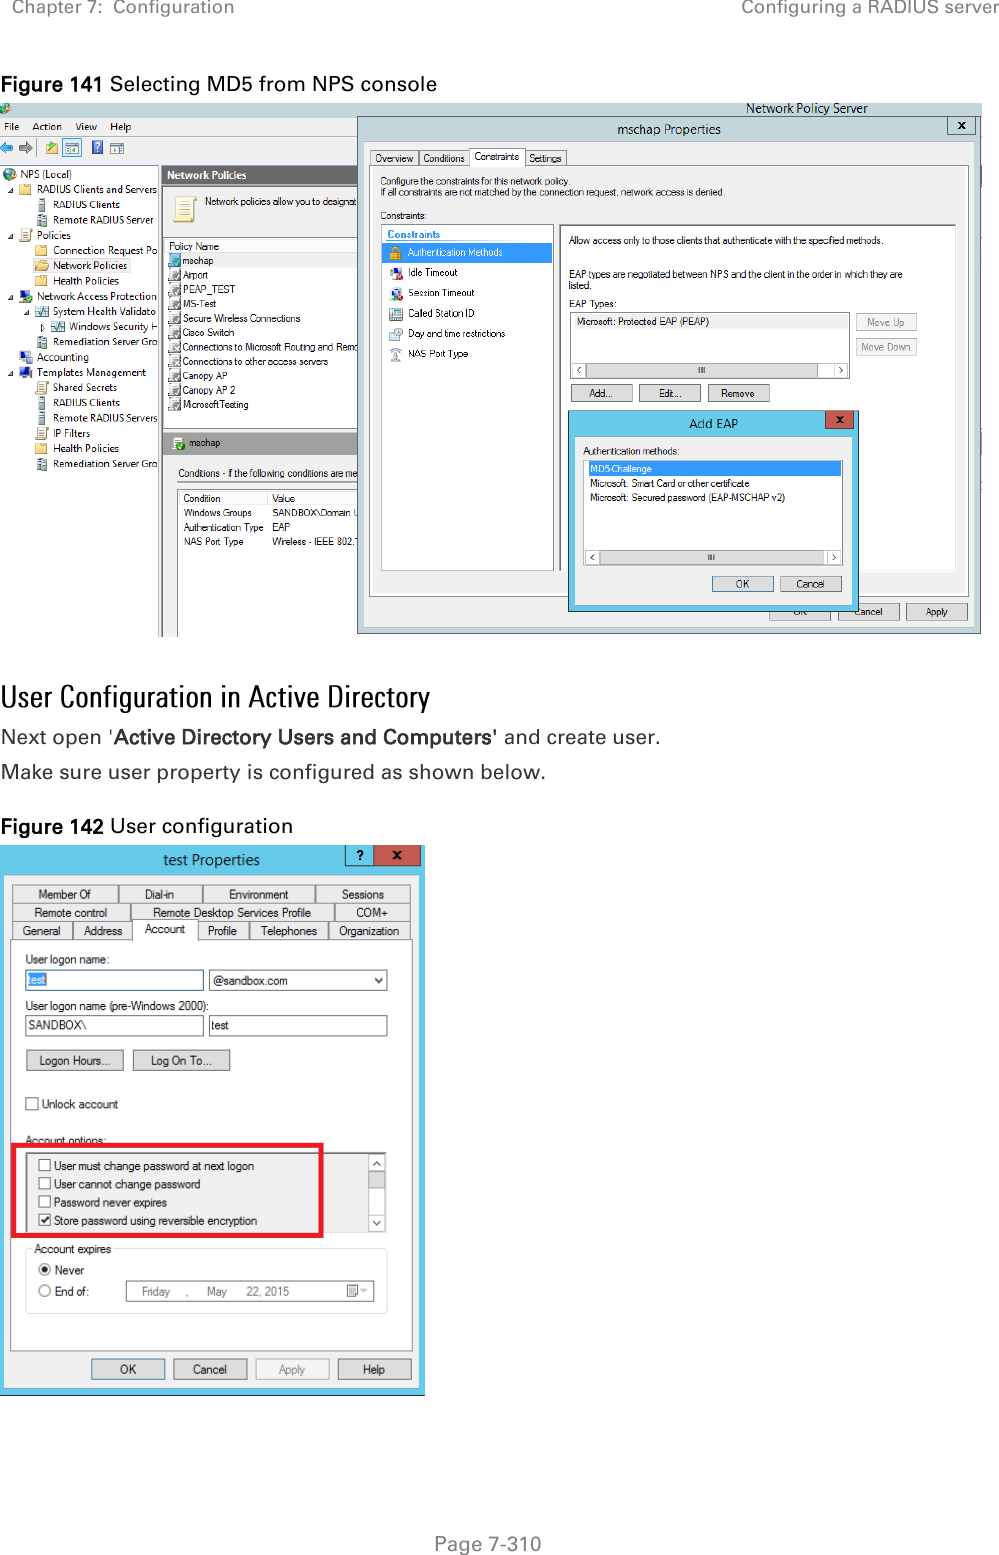 Chapter 7:  Configuration Configuring a RADIUS server   Page 7-310 Figure 141 Selecting MD5 from NPS console   Next open &apos;Active Directory Users and Computers&apos; and create user. Make sure user property is configured as shown below. Figure 142 User configuration    